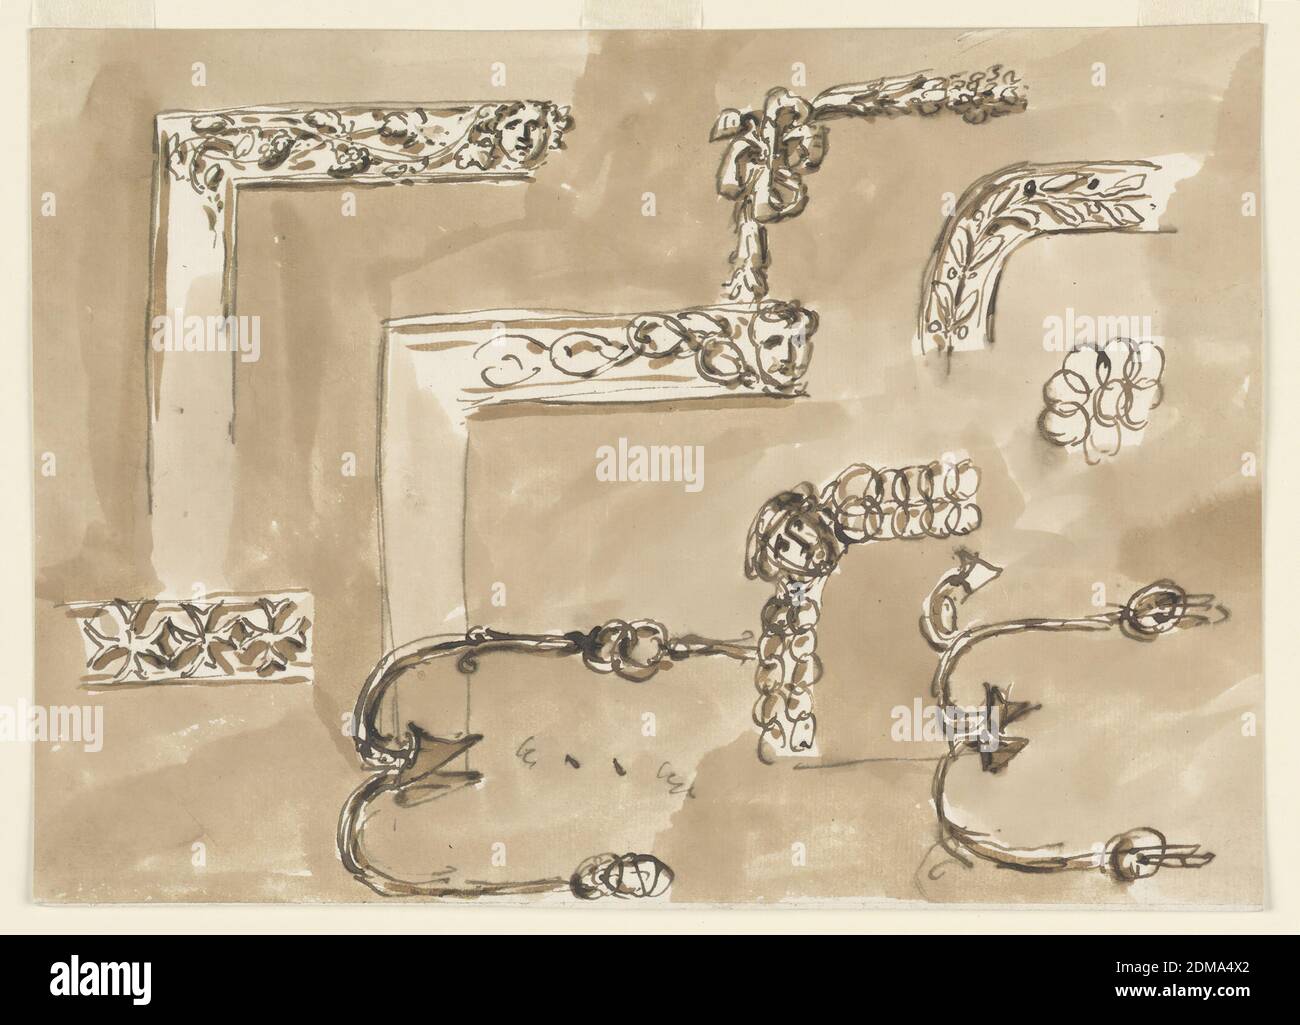 Metal frames for Purses, Giuseppe Barberi, Italian, 1746–1809, Pen and brown ink, brush and brown wash on lined off-white laid paper, Top row: a left top corner. From a band in the top center start intertwined vine stems. A left top corner: garlands fastened by a bow knot, in the corner. Left top part of a bow, decorated with a laurel bough. Second row: a left top corner decorated with a chain, starting from a man's head, in the top center. A rosette. Third row: fragment of a band with three Maltese crosses. A bow formed by chains which are connected in the corner of a head. Stock Photo